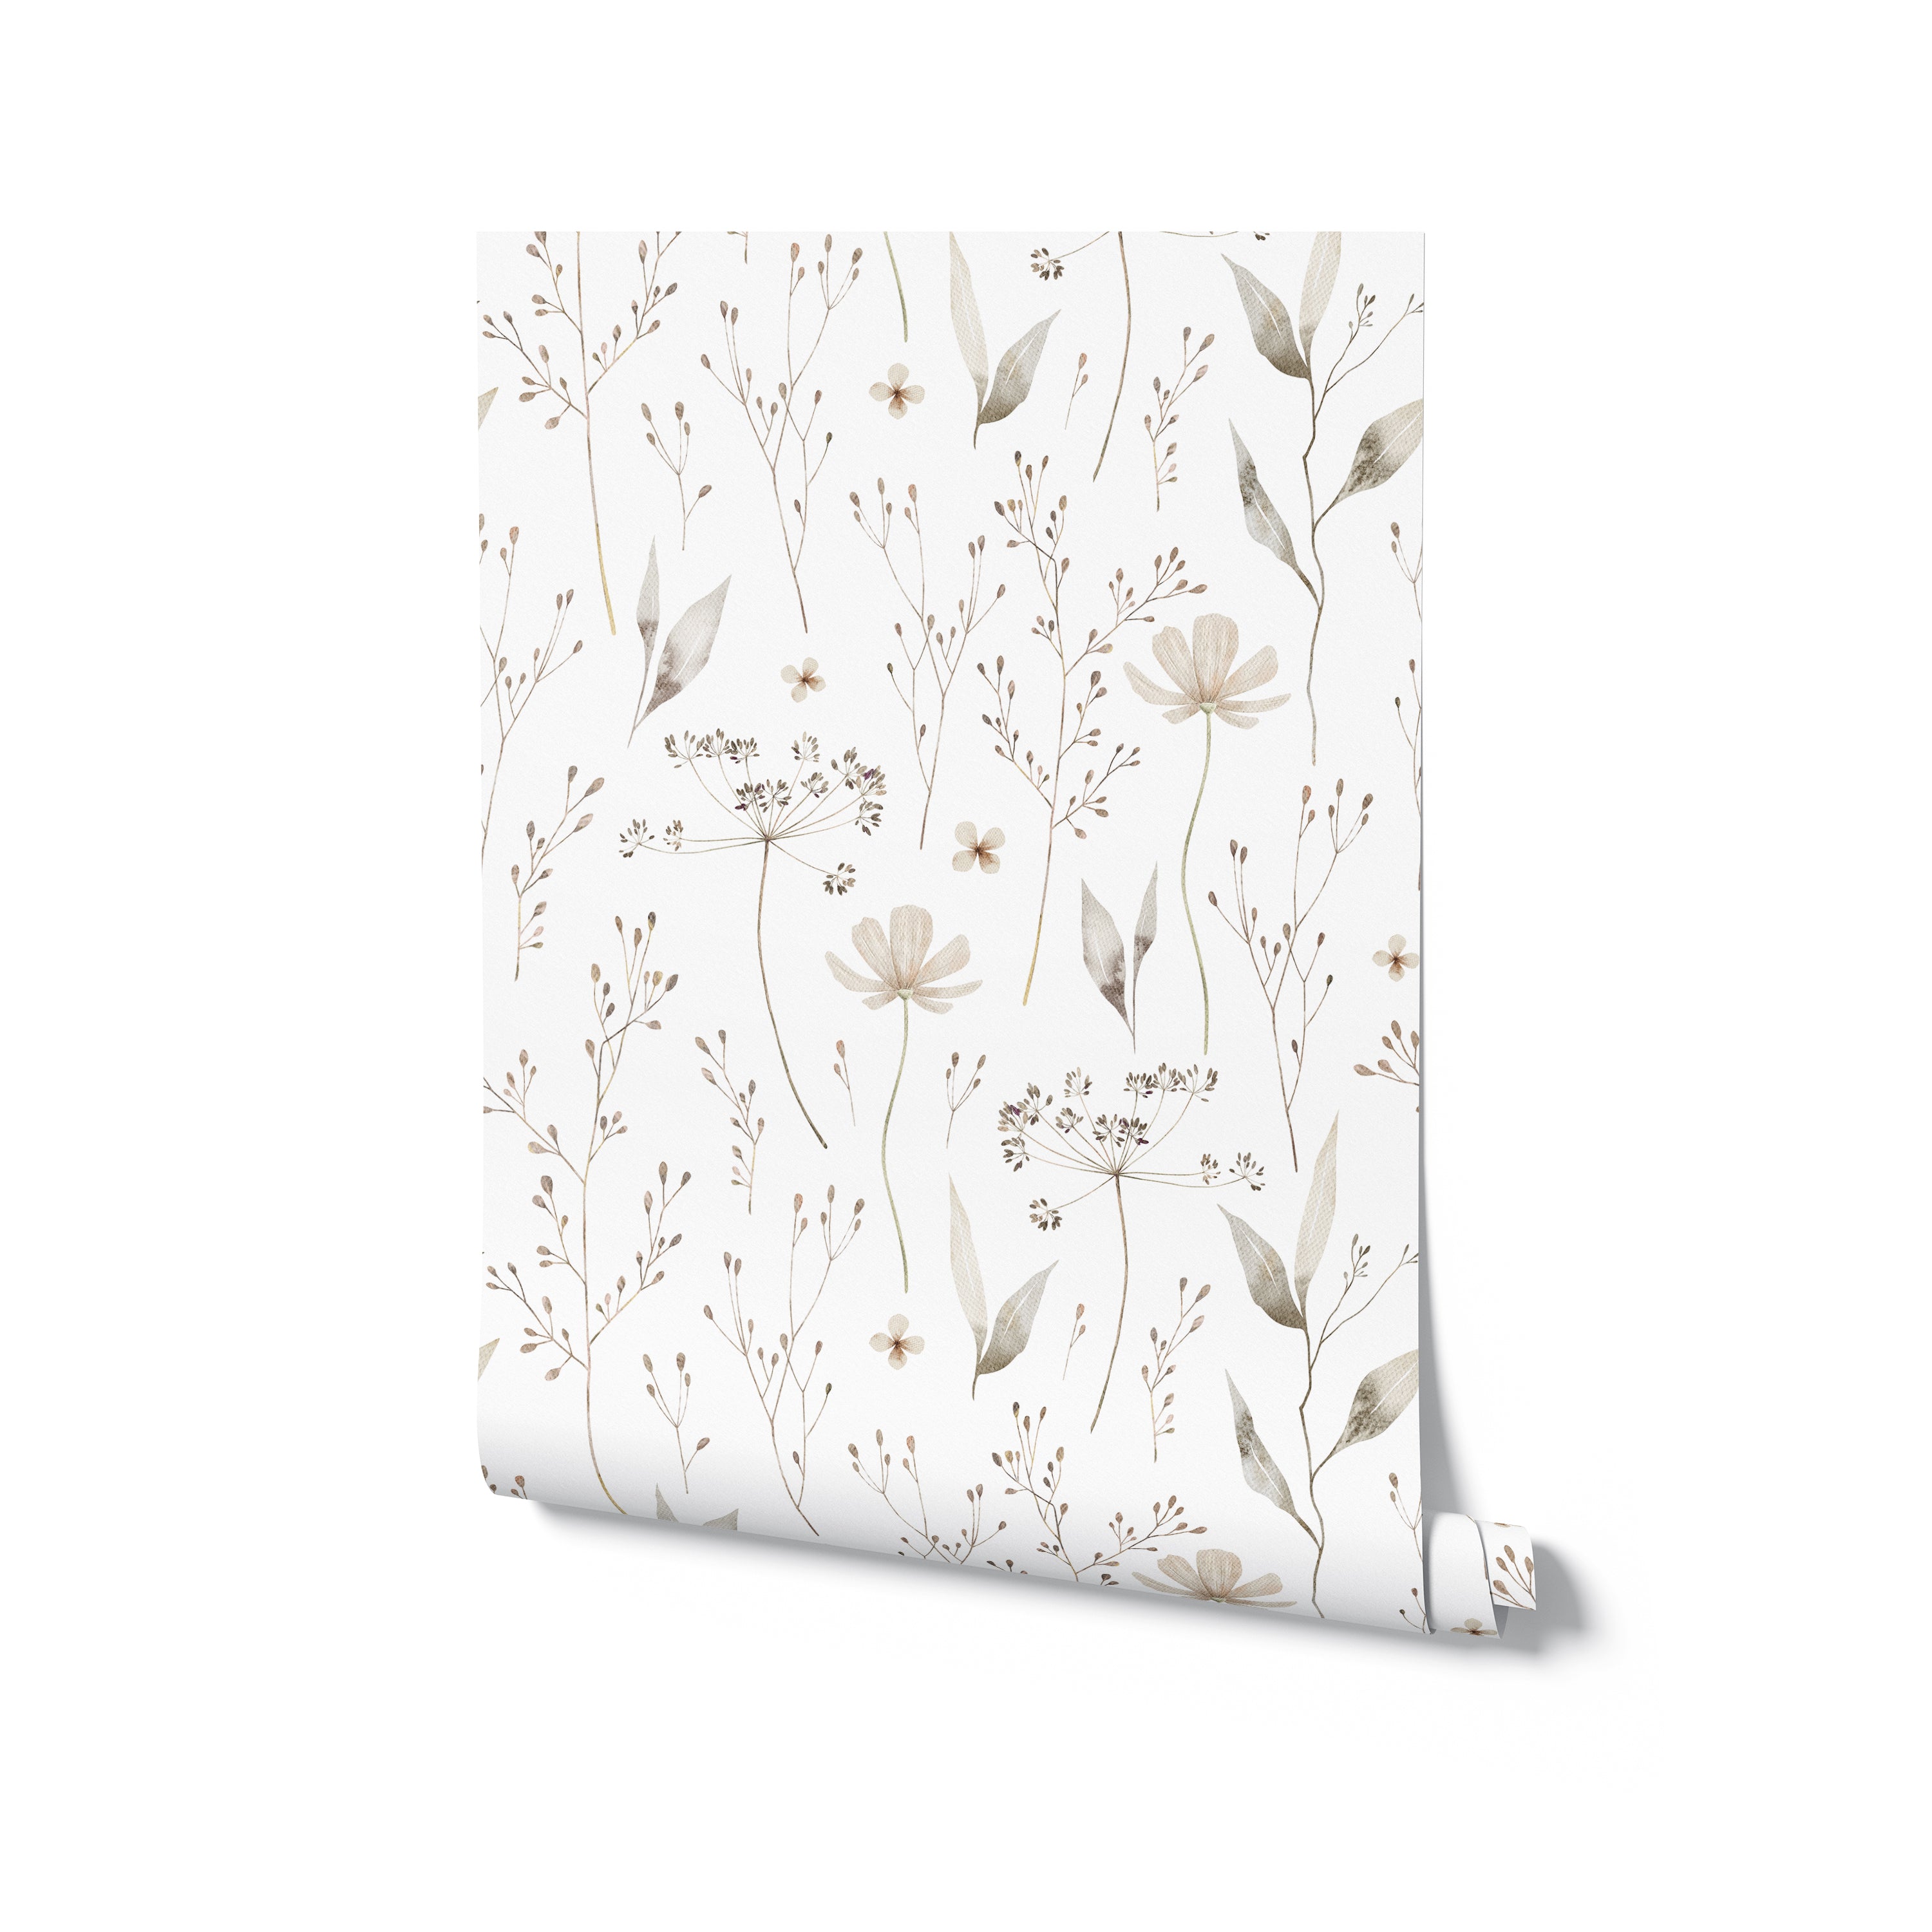 A detailed close-up of the rolled Tranquil Bloom Wallpaper showcasing the soft color palette and gentle floral motifs, perfect for creating a serene and inviting atmosphere in any interior space.